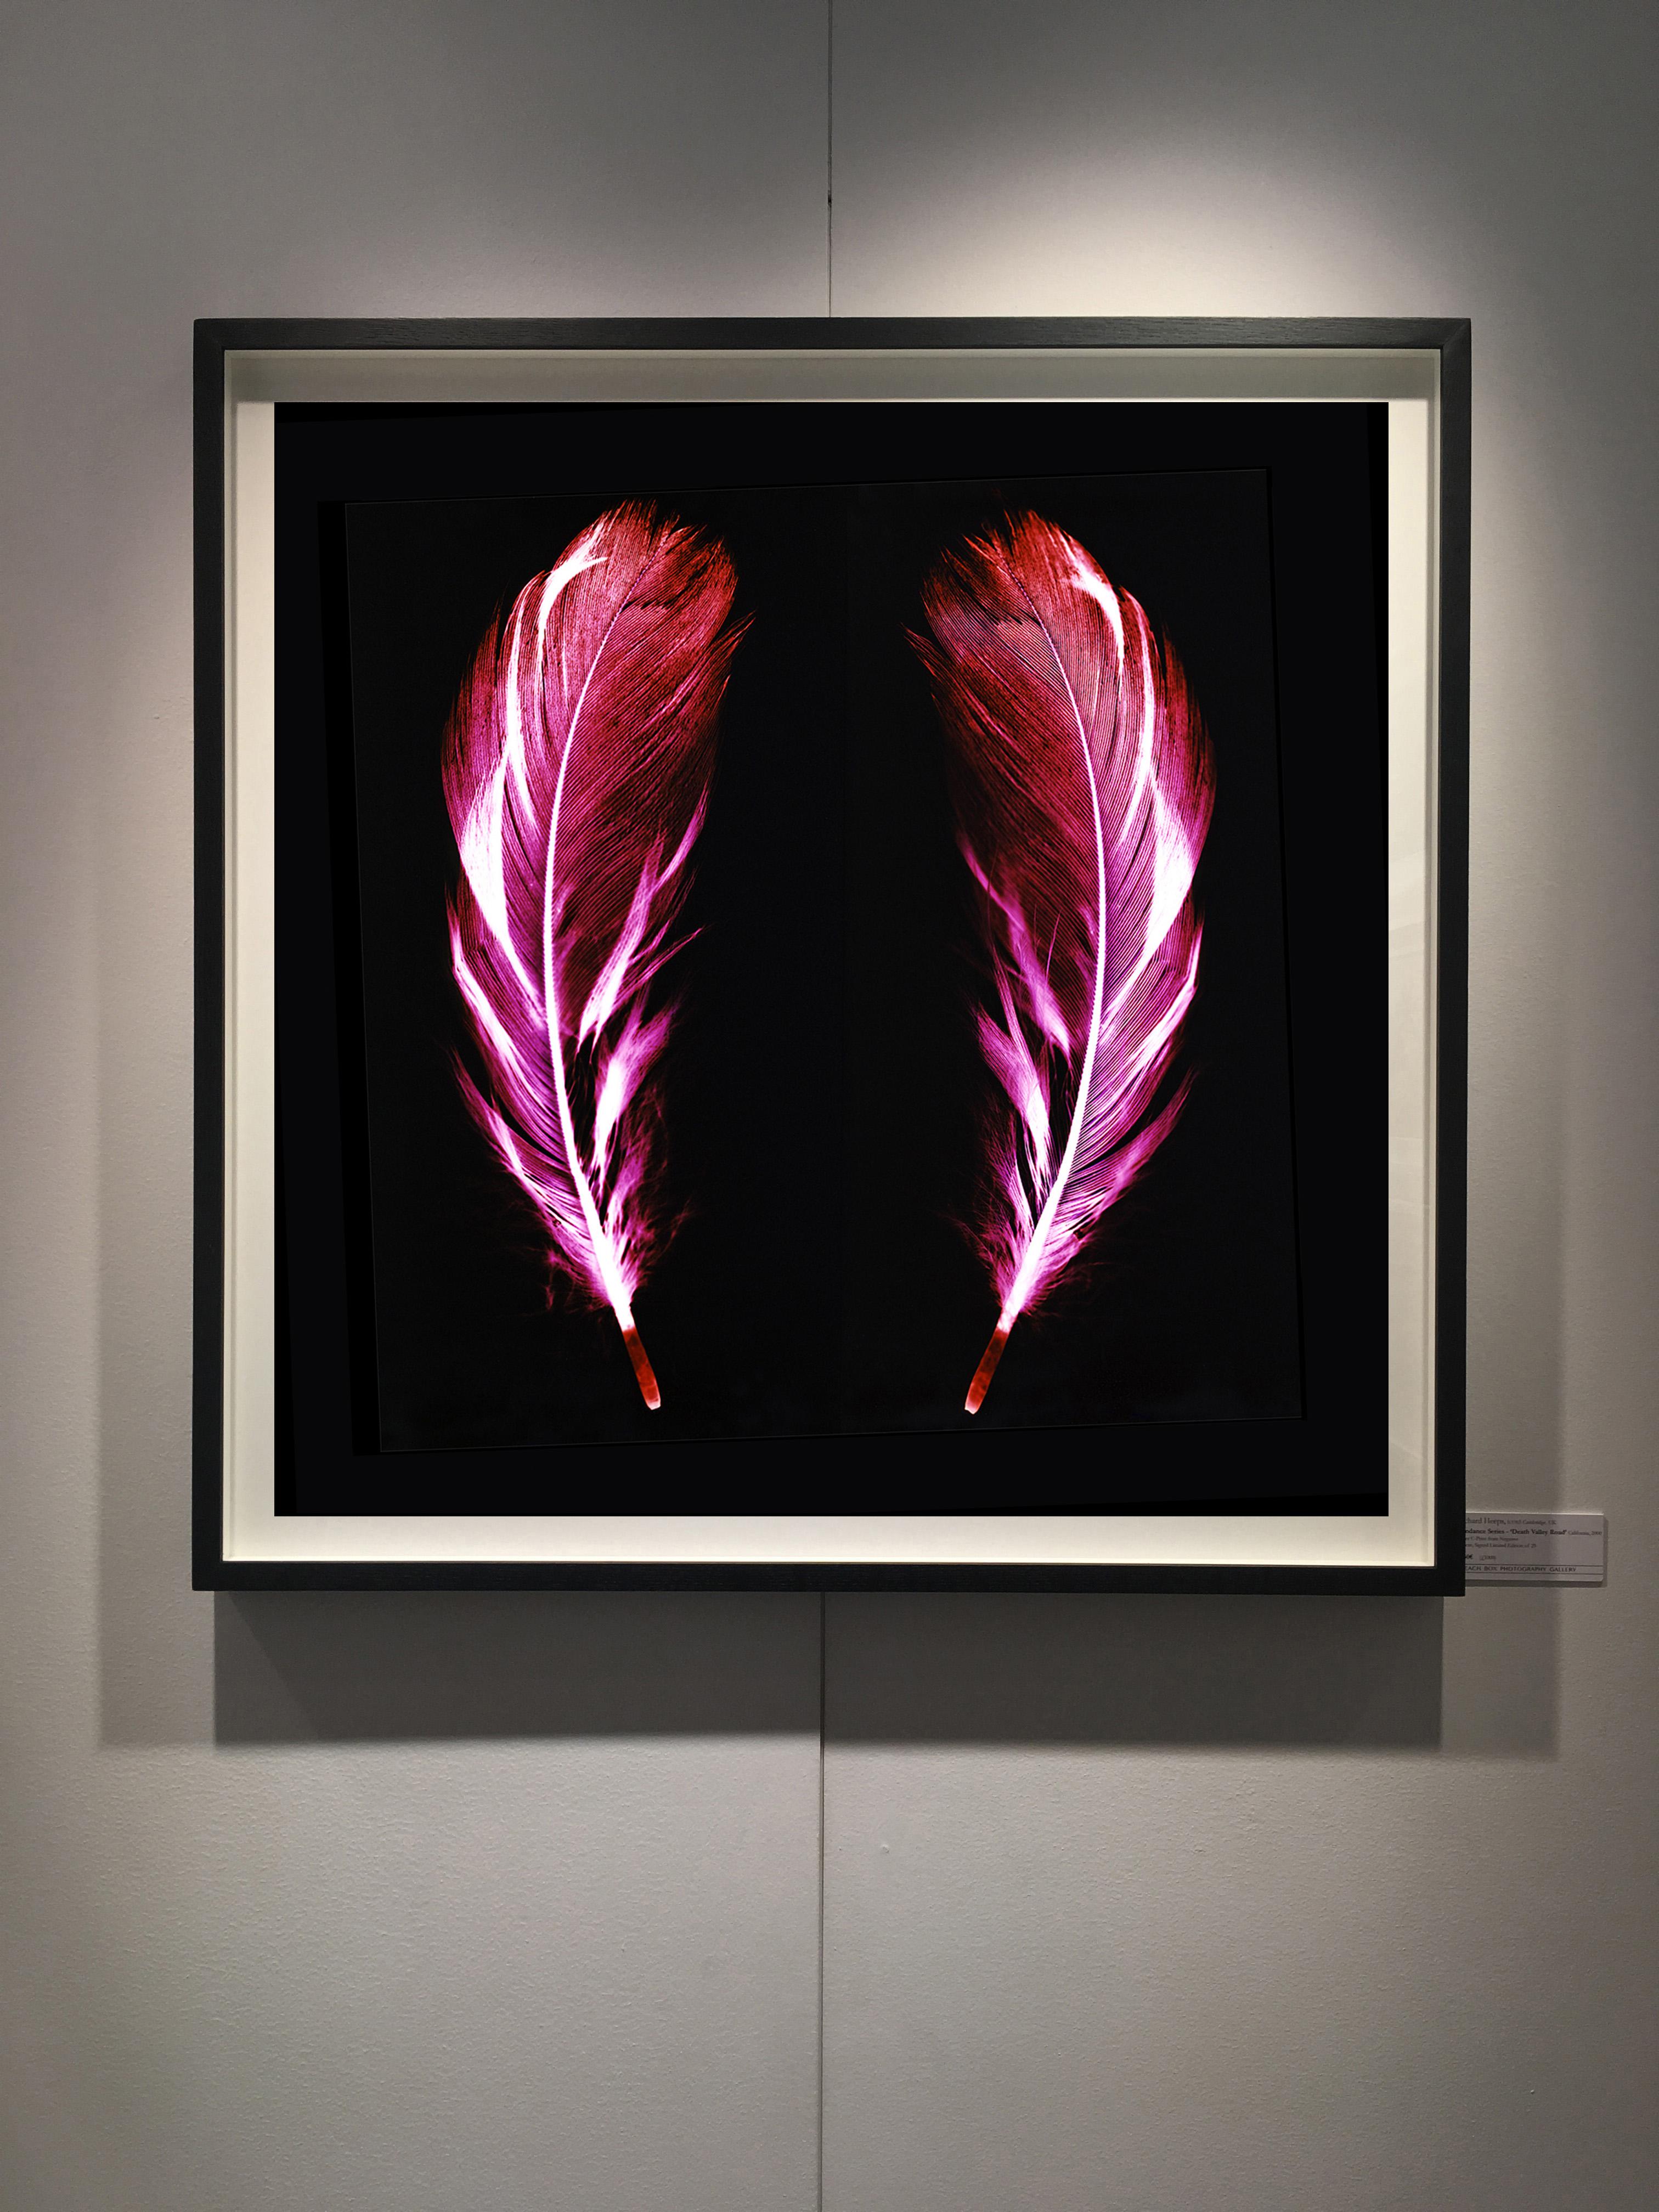 Flight of Fancy - Electric Pink Feathers - Conceptual, Color Photography - Black Abstract Photograph by Natasha Heidler